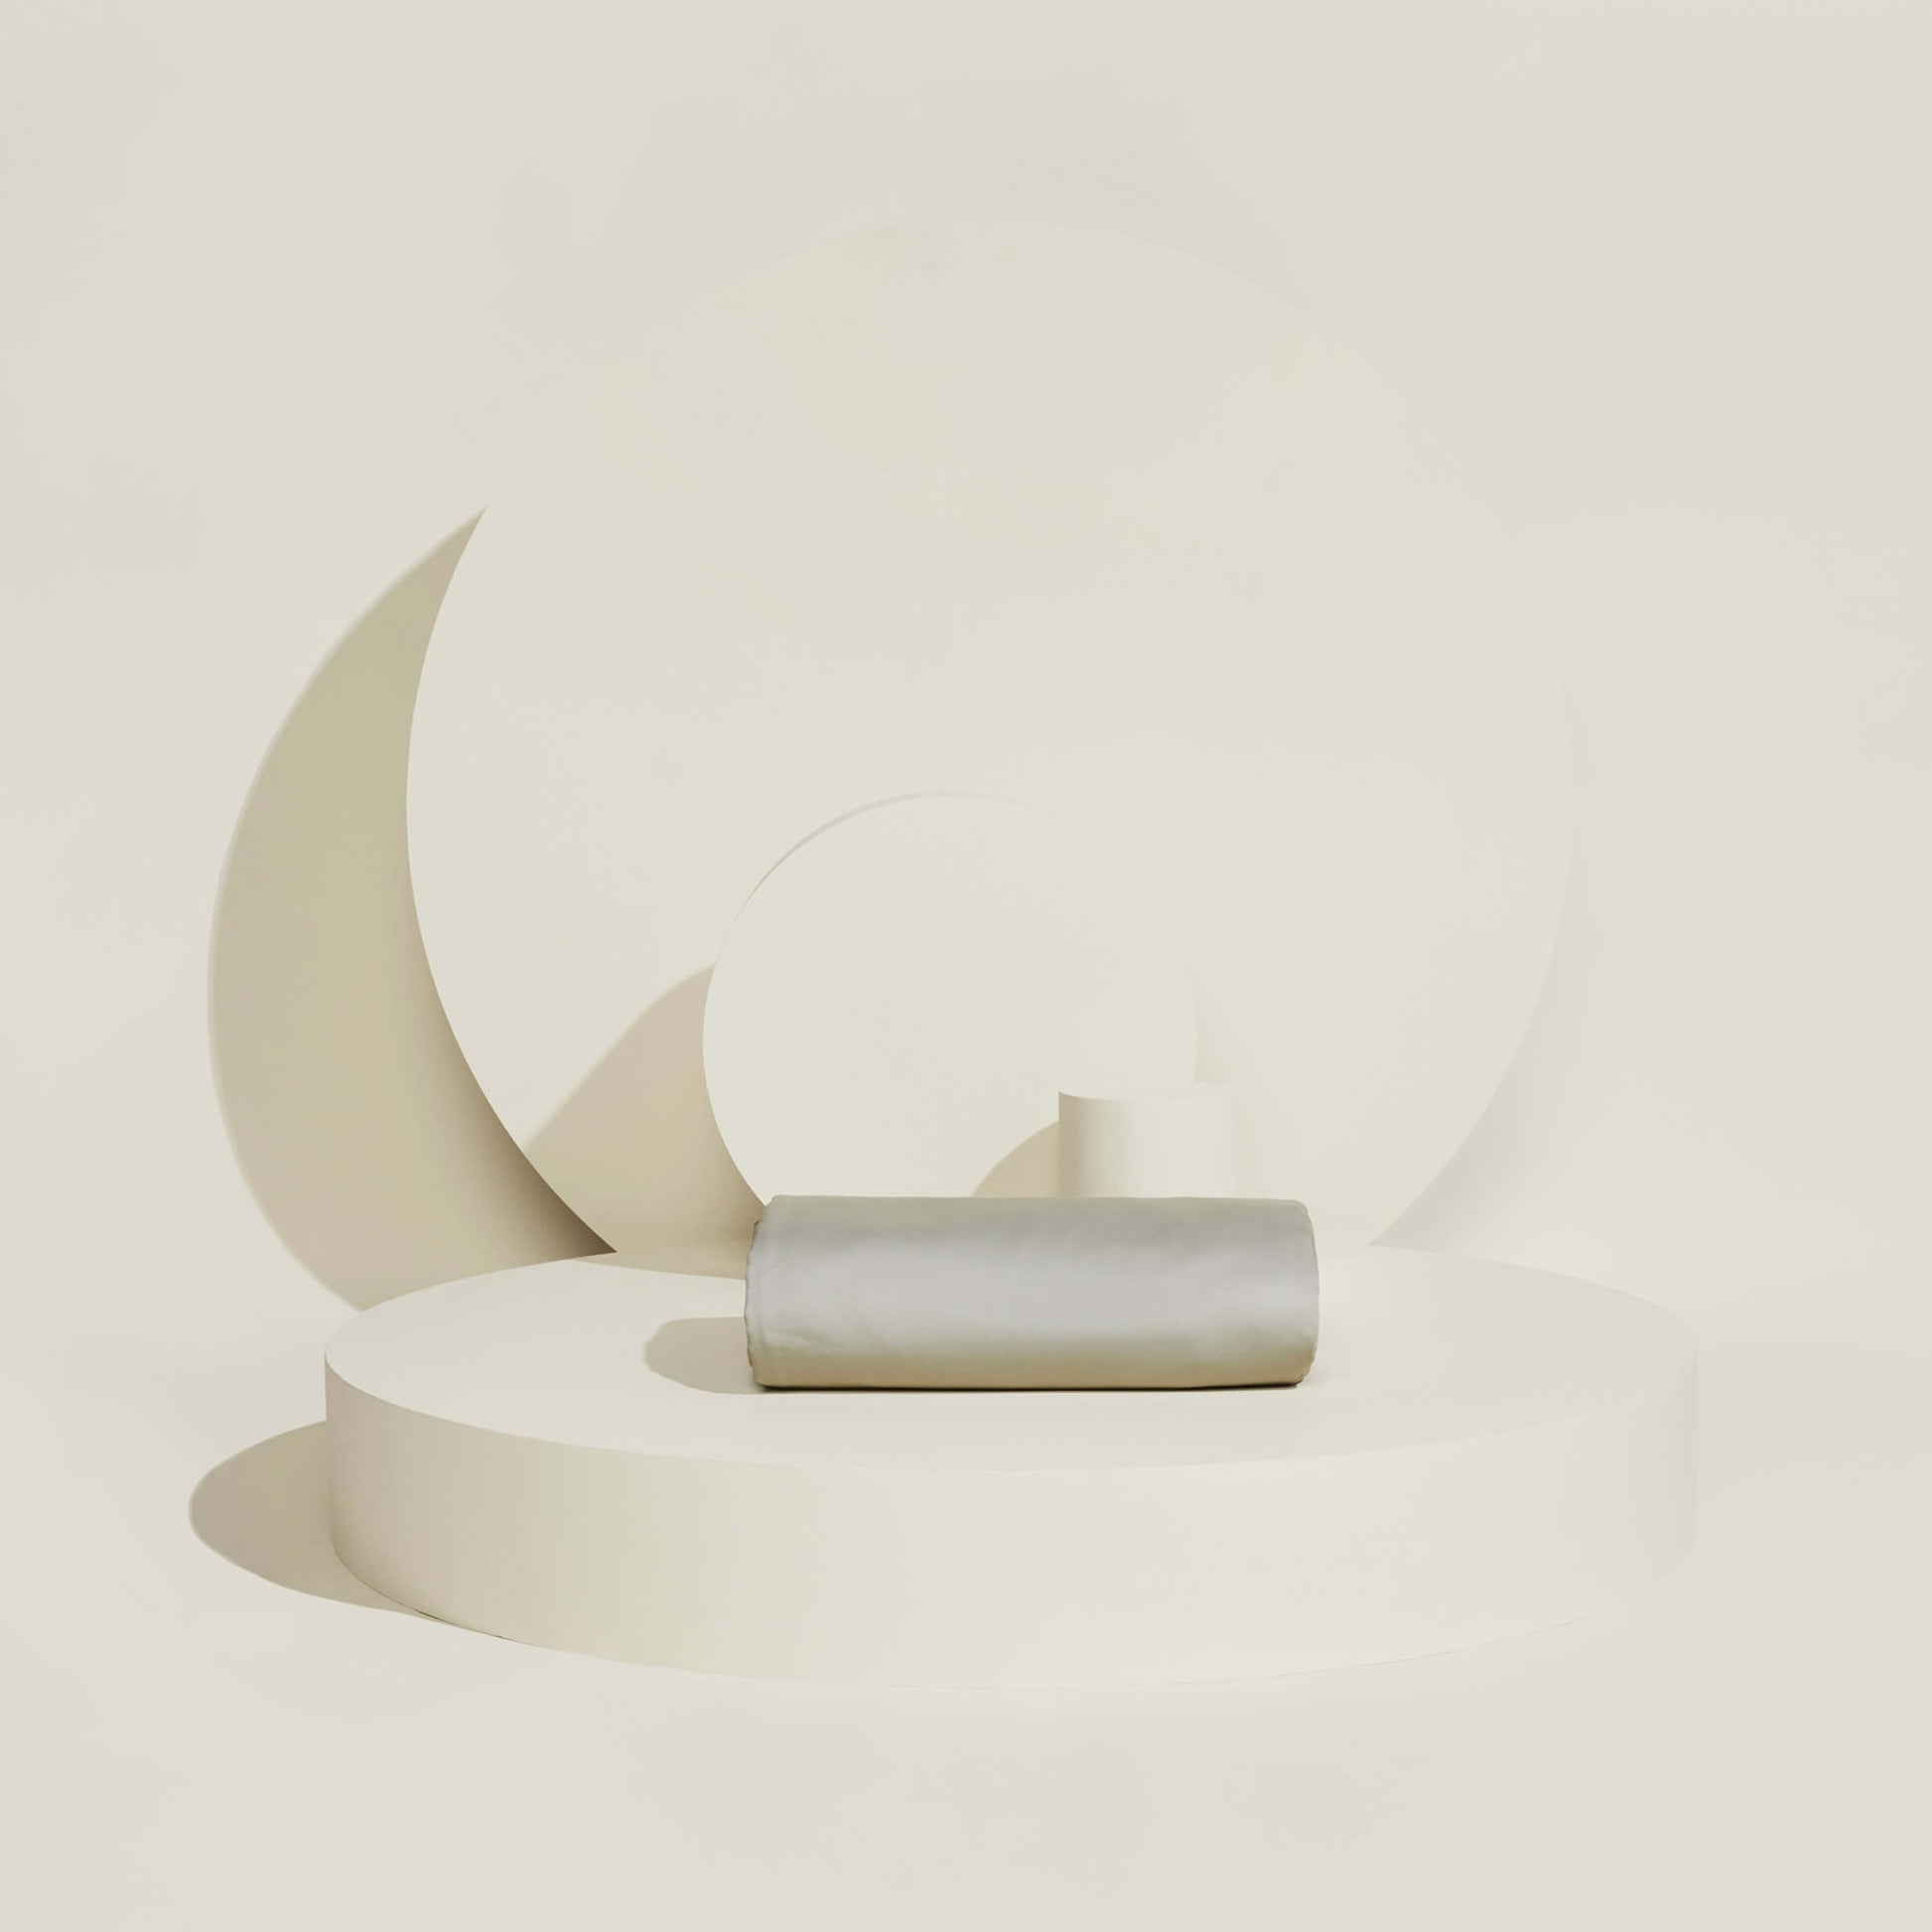 The Slumber Cloud Essential Duvet Cover with temperature regulation technology folded and propped on a creambackground